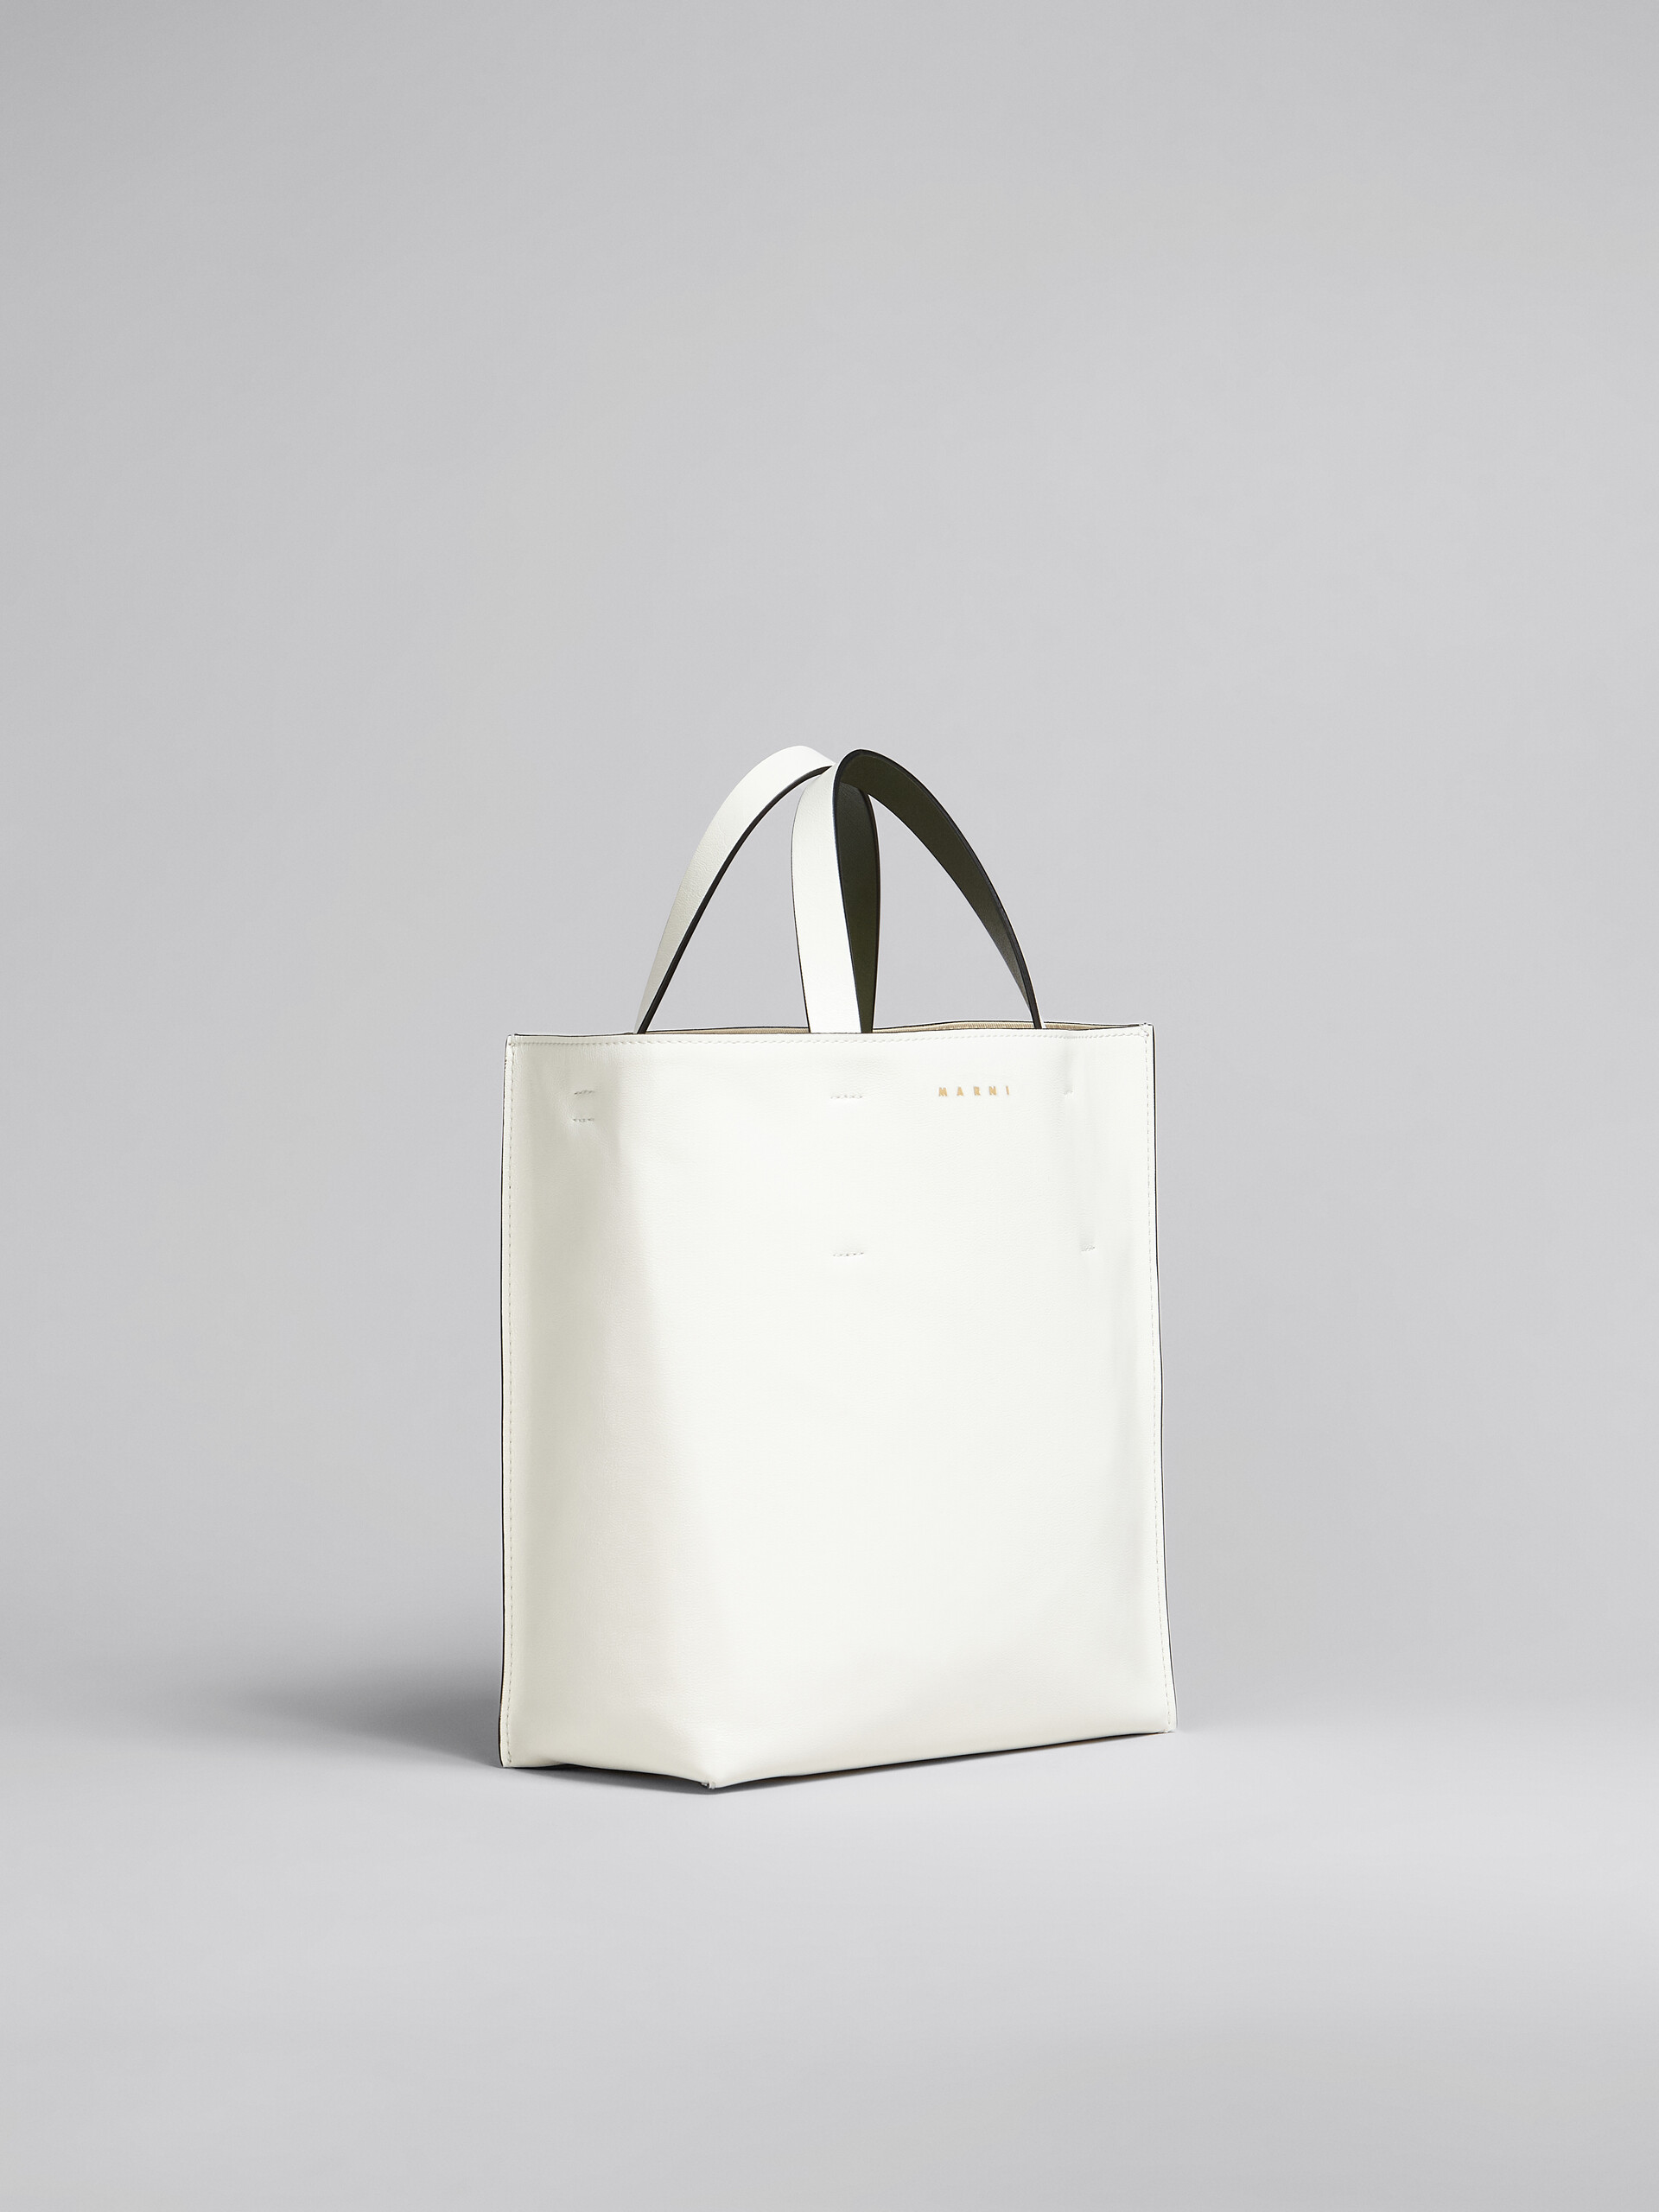 Museo Soft Small Bag in black and white leather - Shopping Bags - Image 6